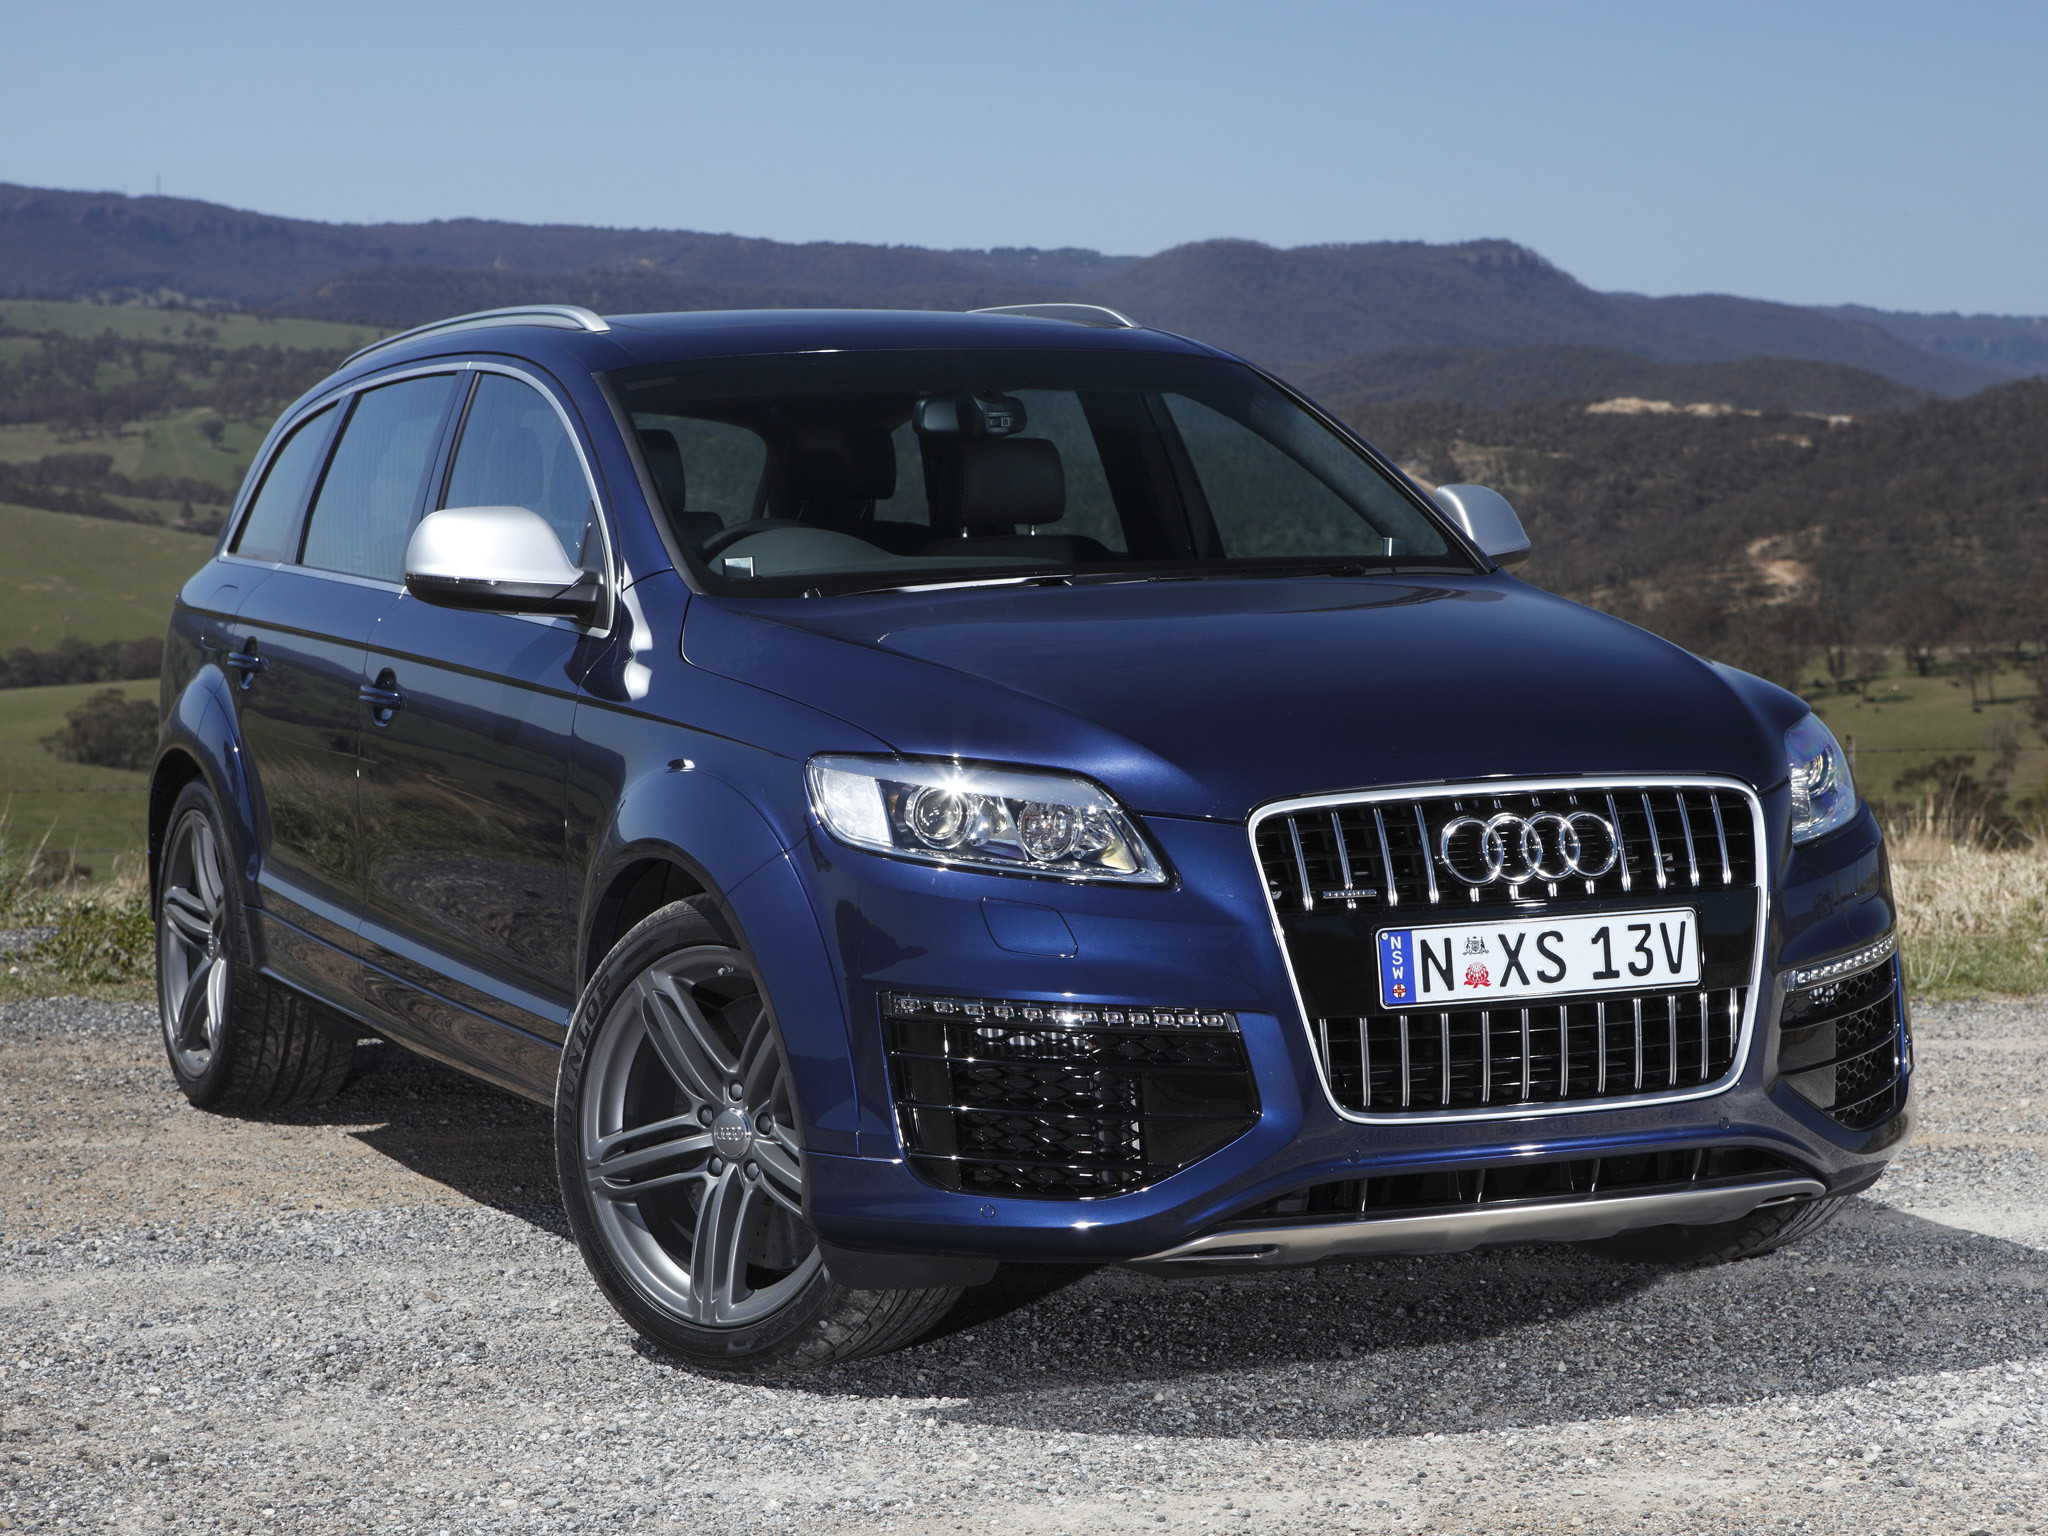 Audi Q7 Cars: A Fusion of Style and Performance